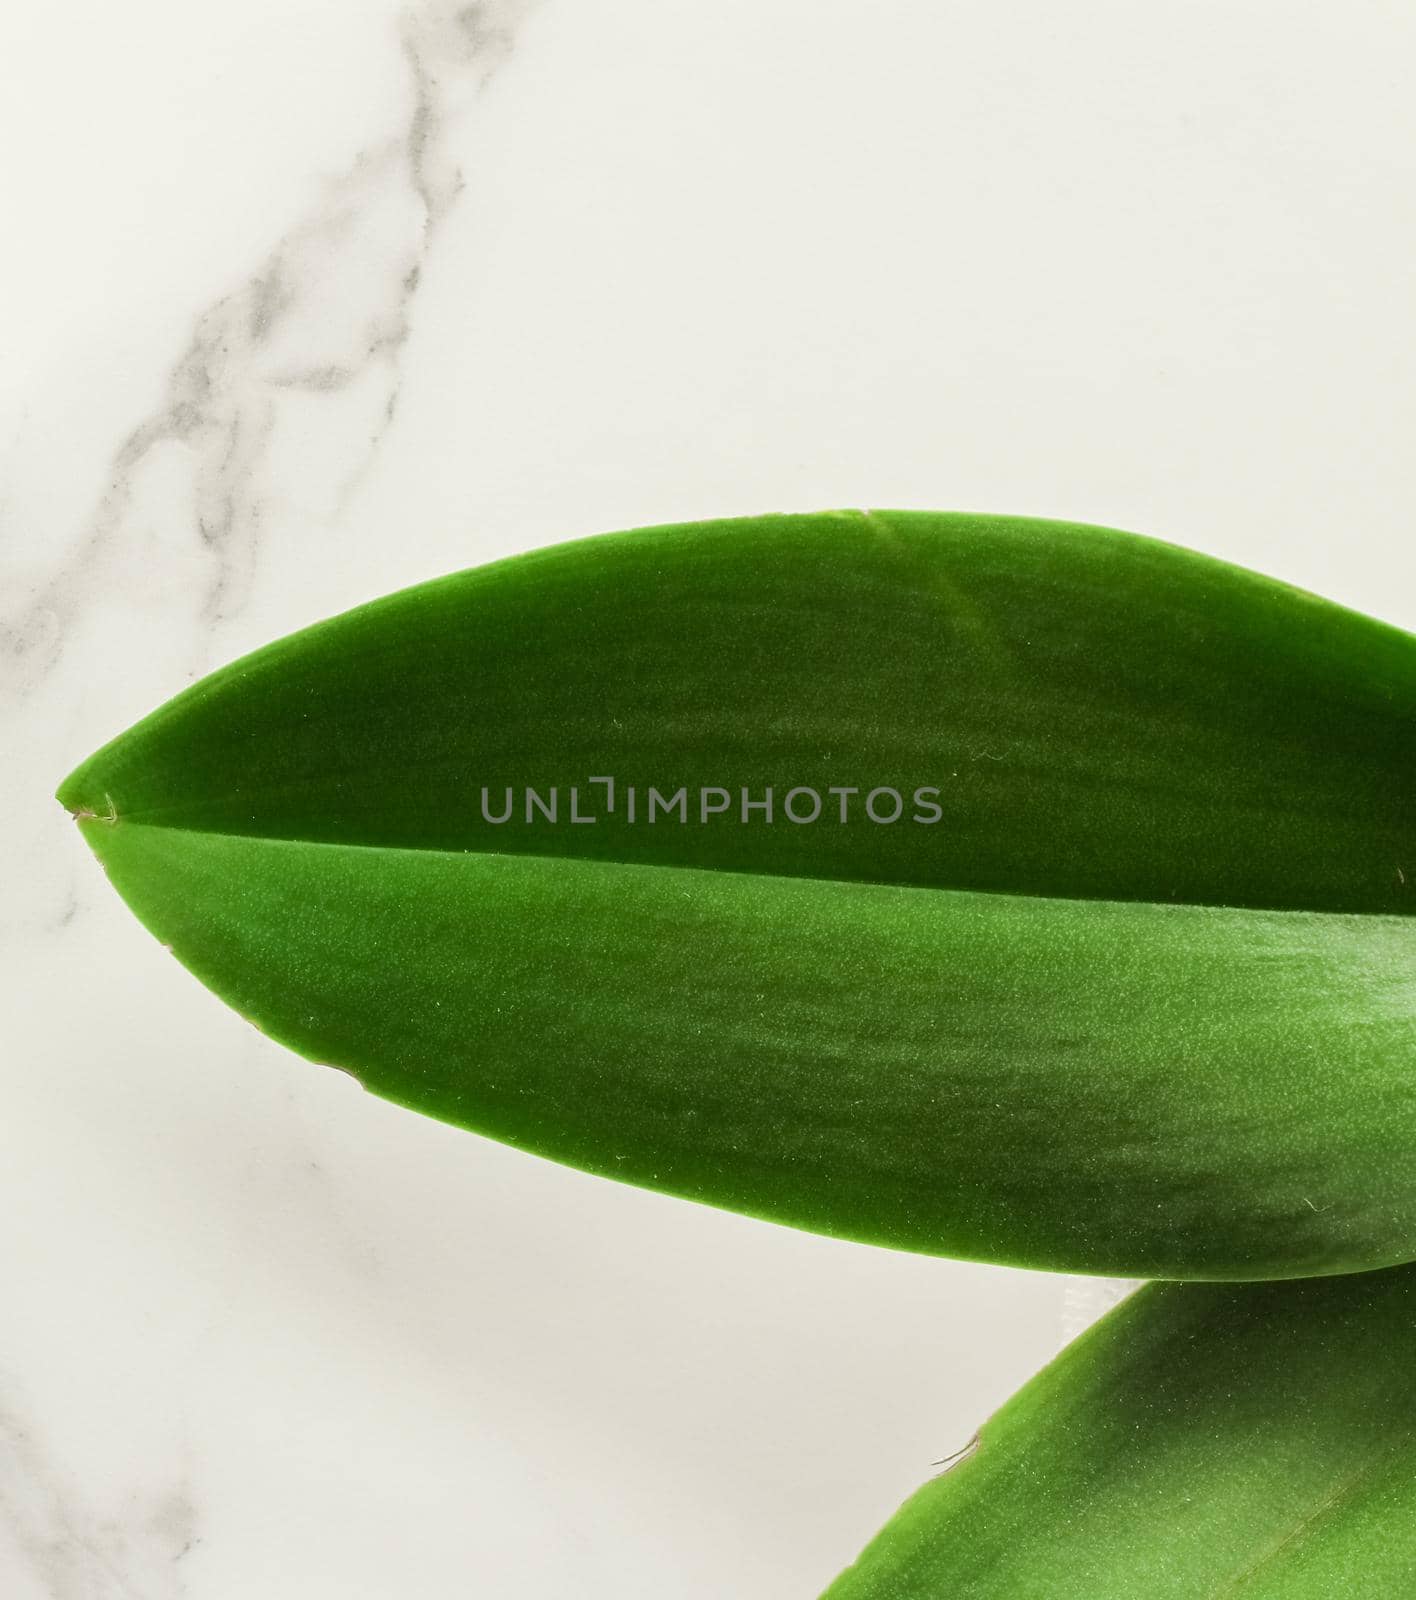 Green leaf on marble, flatlay - luxury design background, sustainable products and environmental concept. Eco-friendly way of life